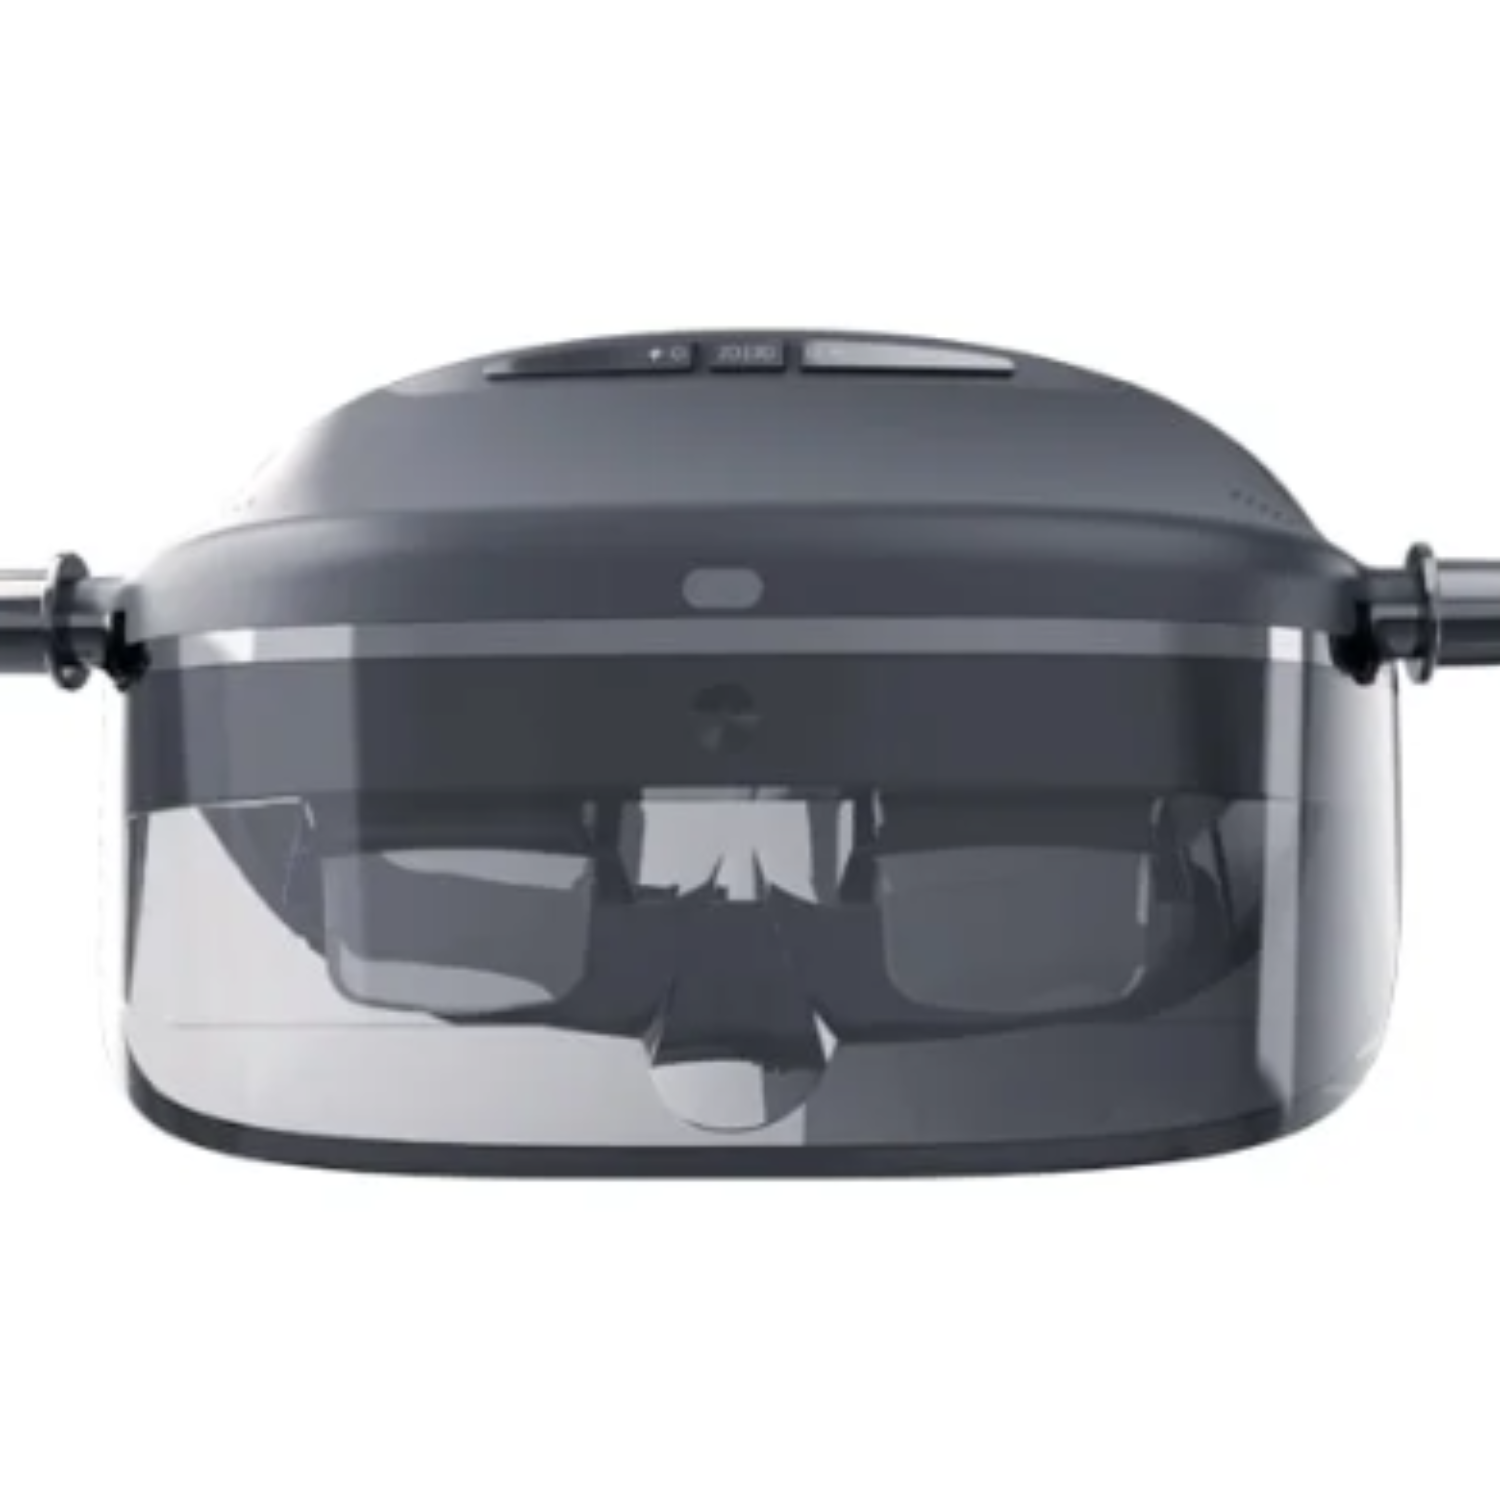 Image showing the front of the Acesight smart glasses.